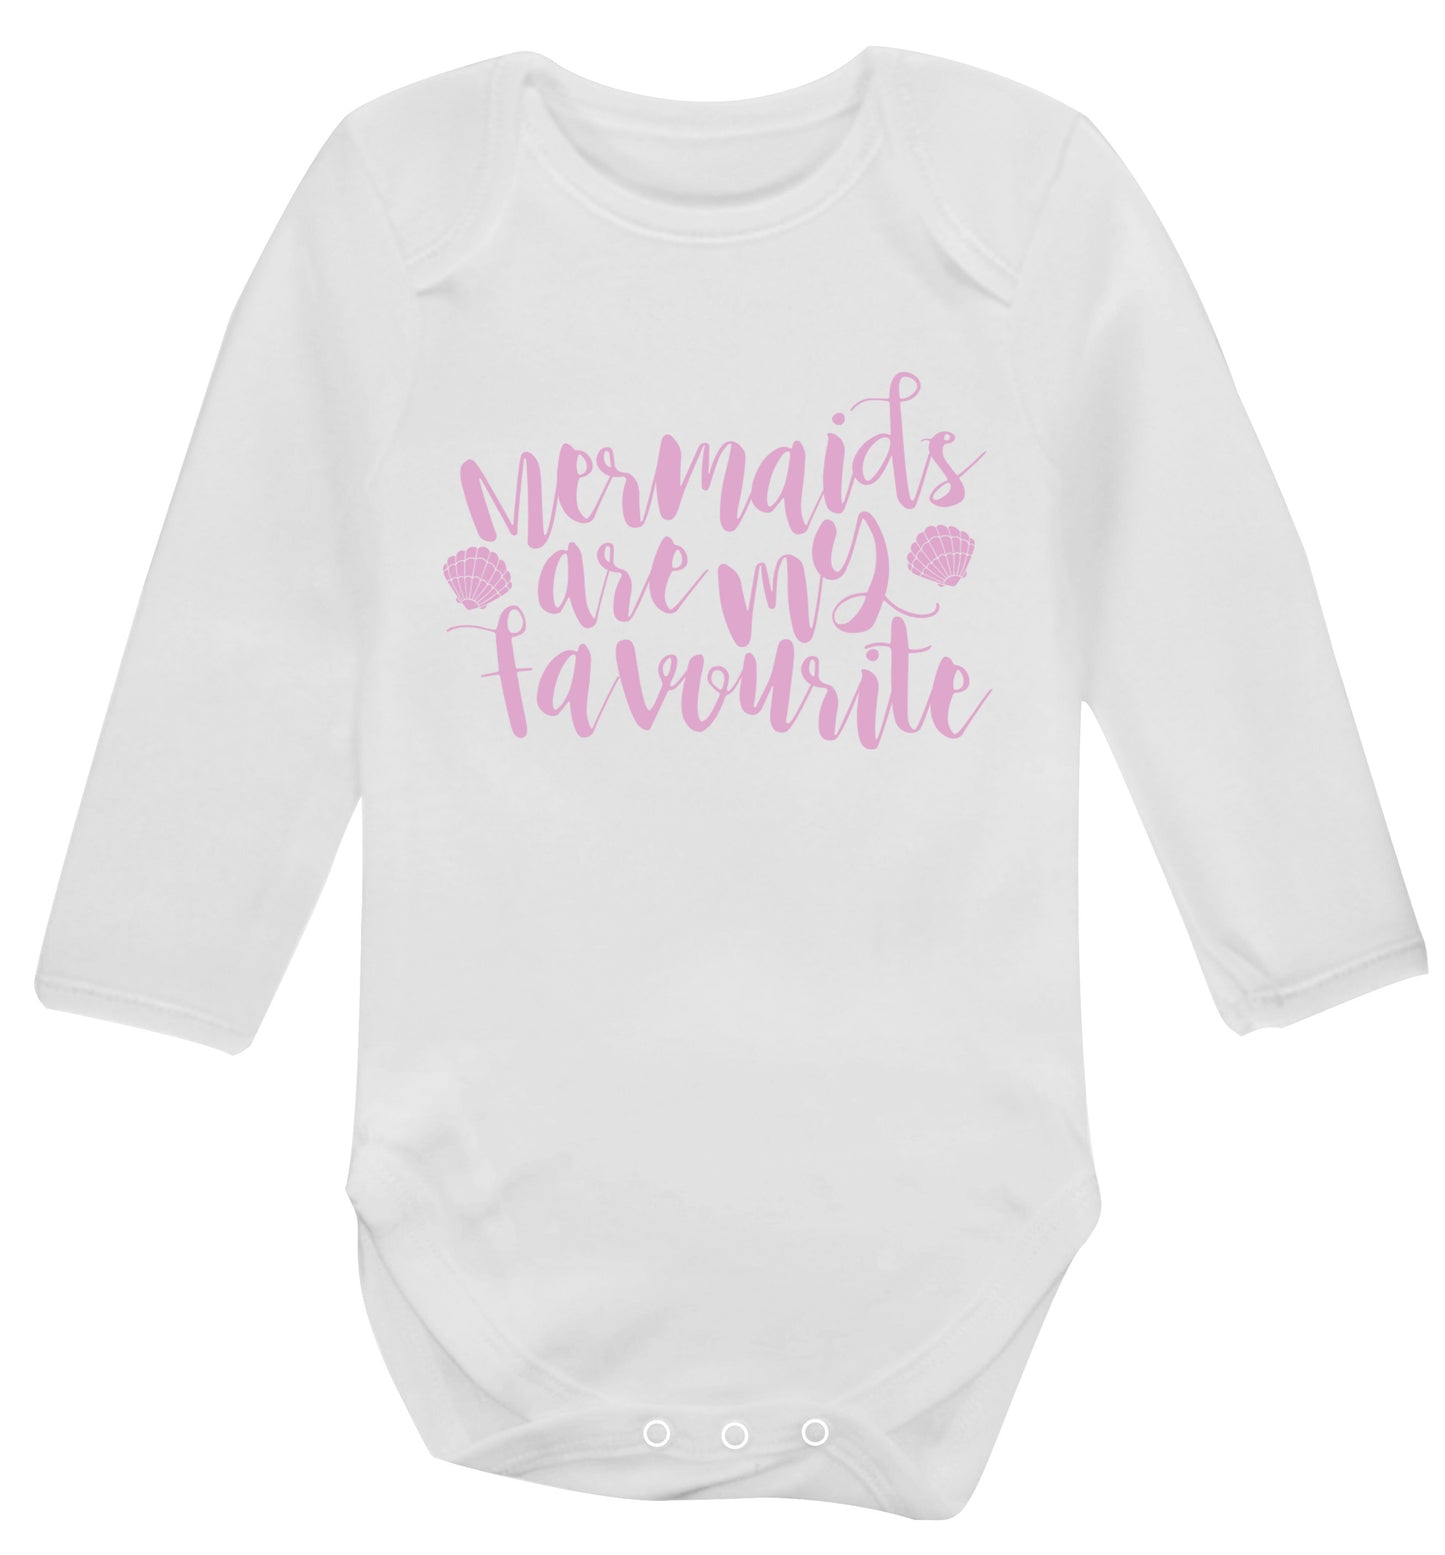 Mermaids are my favourite Baby Vest long sleeved white 6-12 months